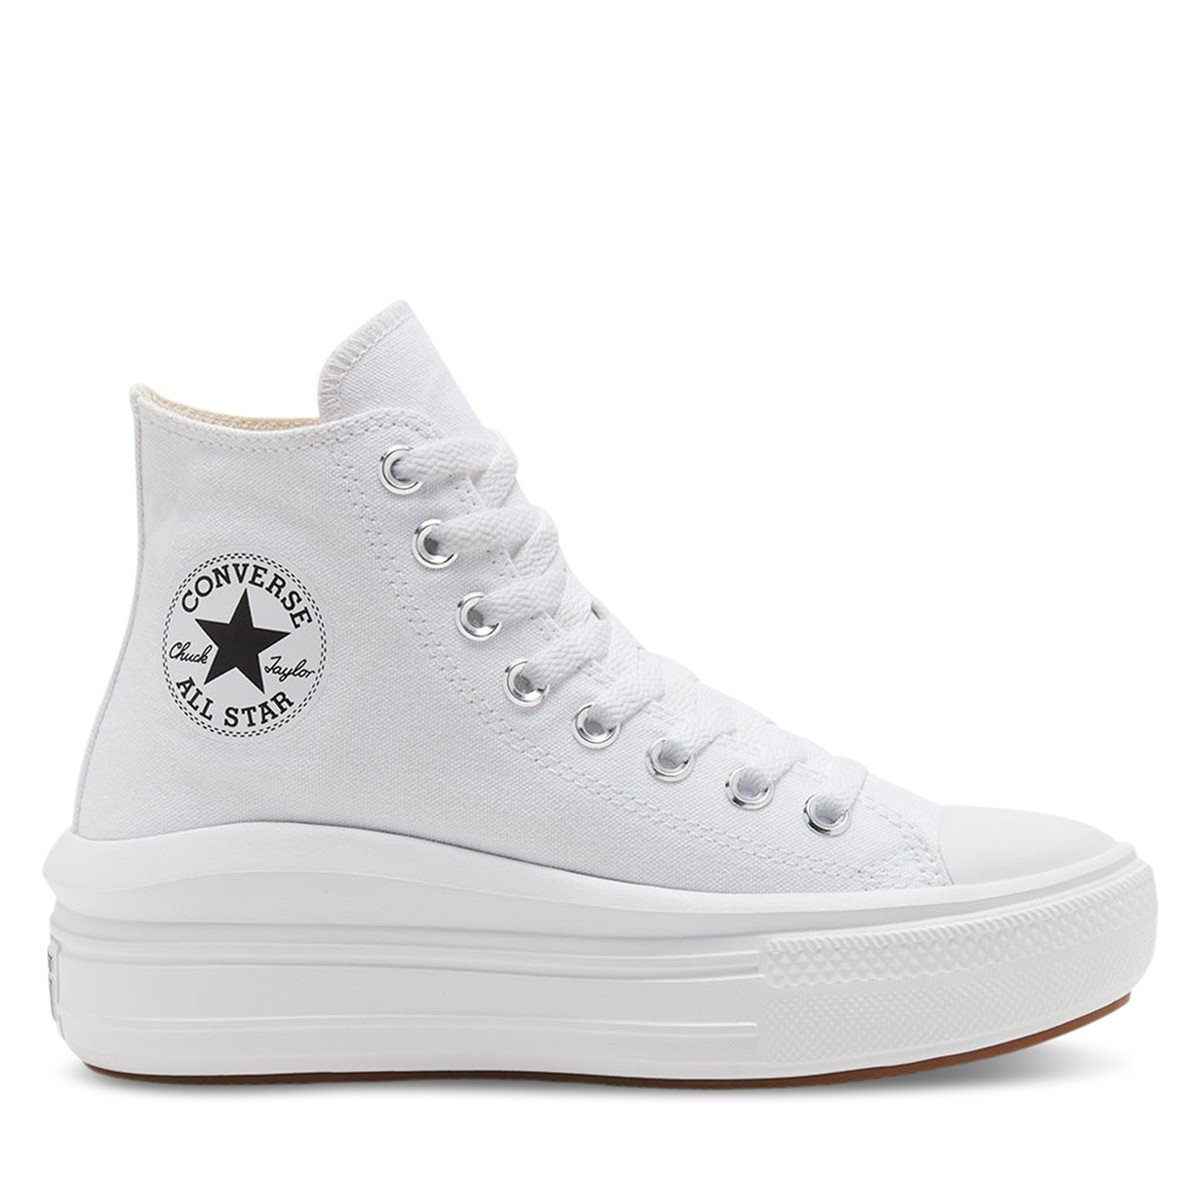 Baskets Chuck Taylor All Star Move Hi blanches pour femmes